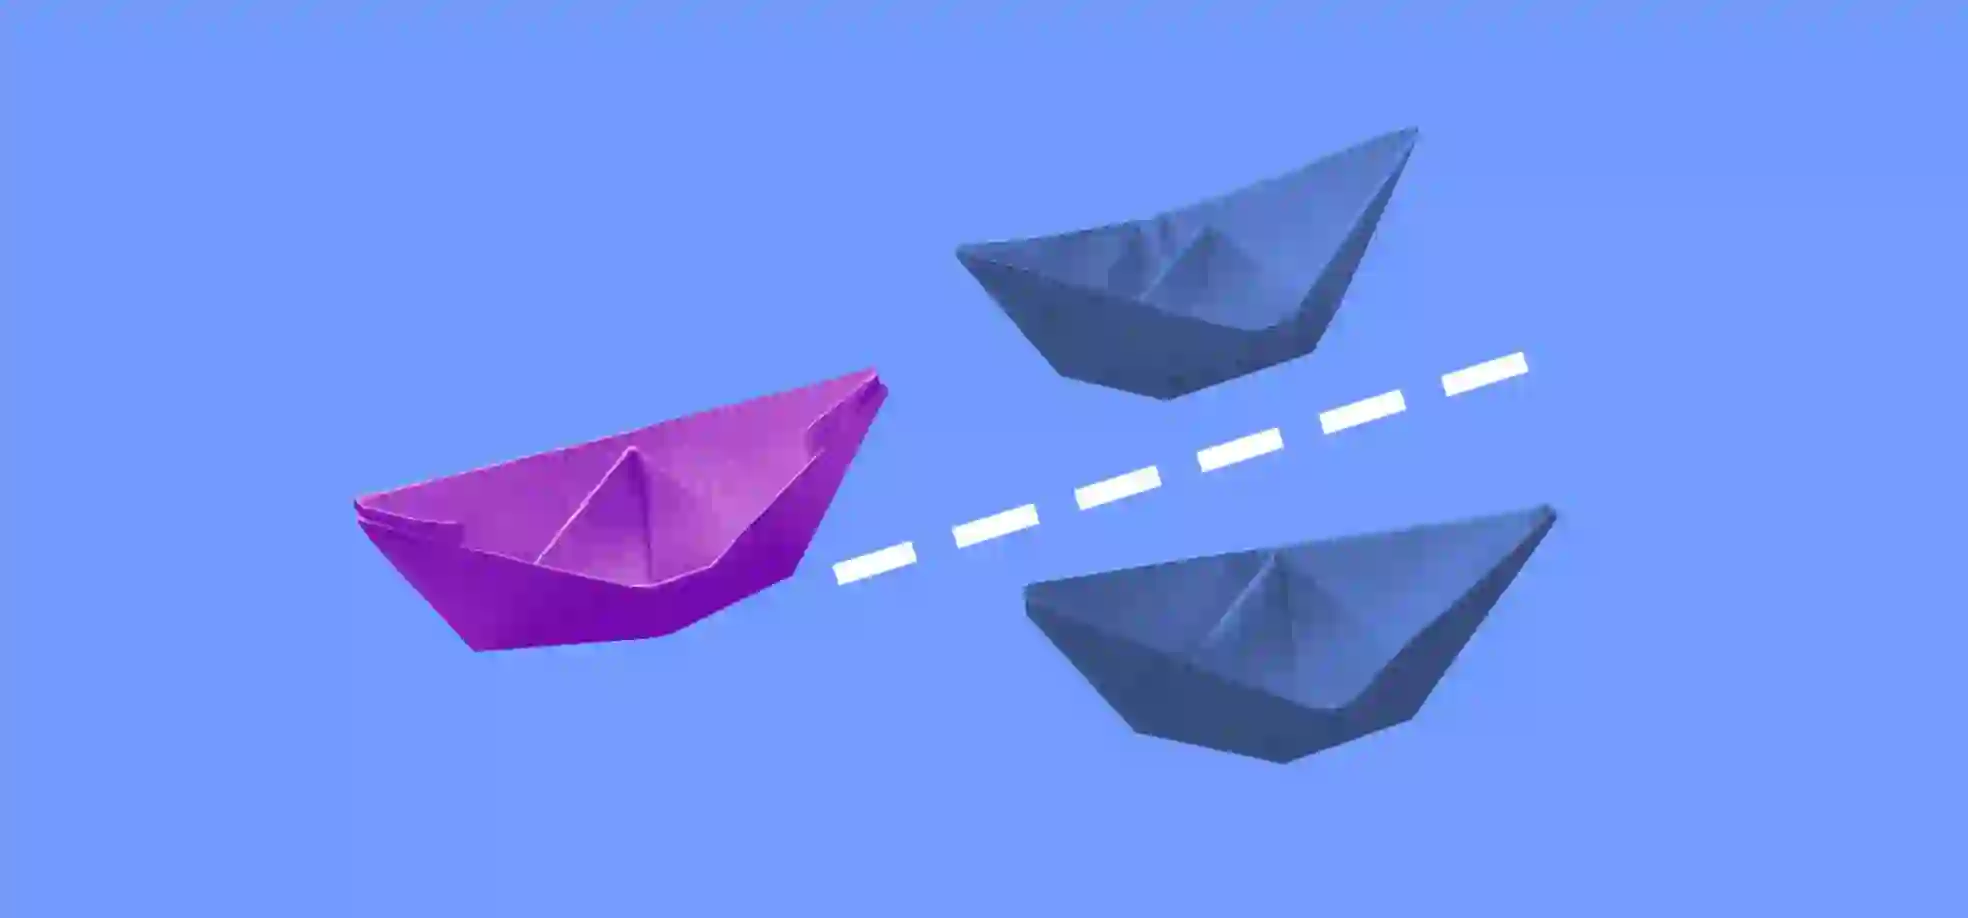 blue and purple paper boat illustration on a blue background